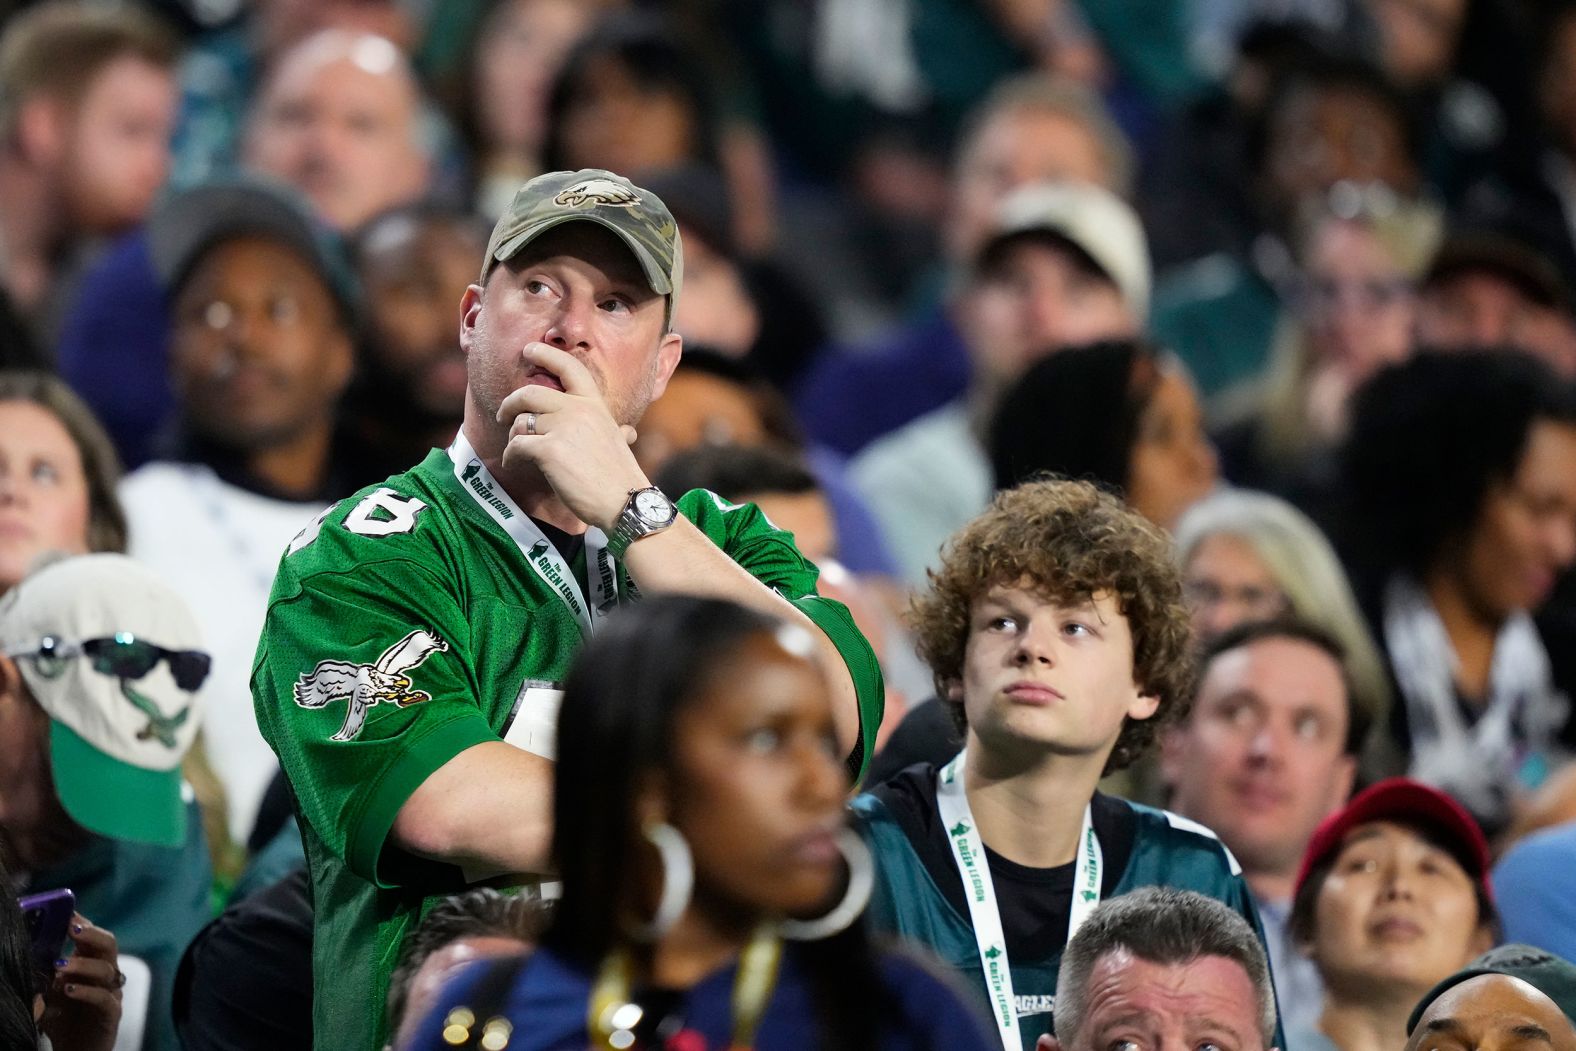 An Eagles fan watches the game in the second half.